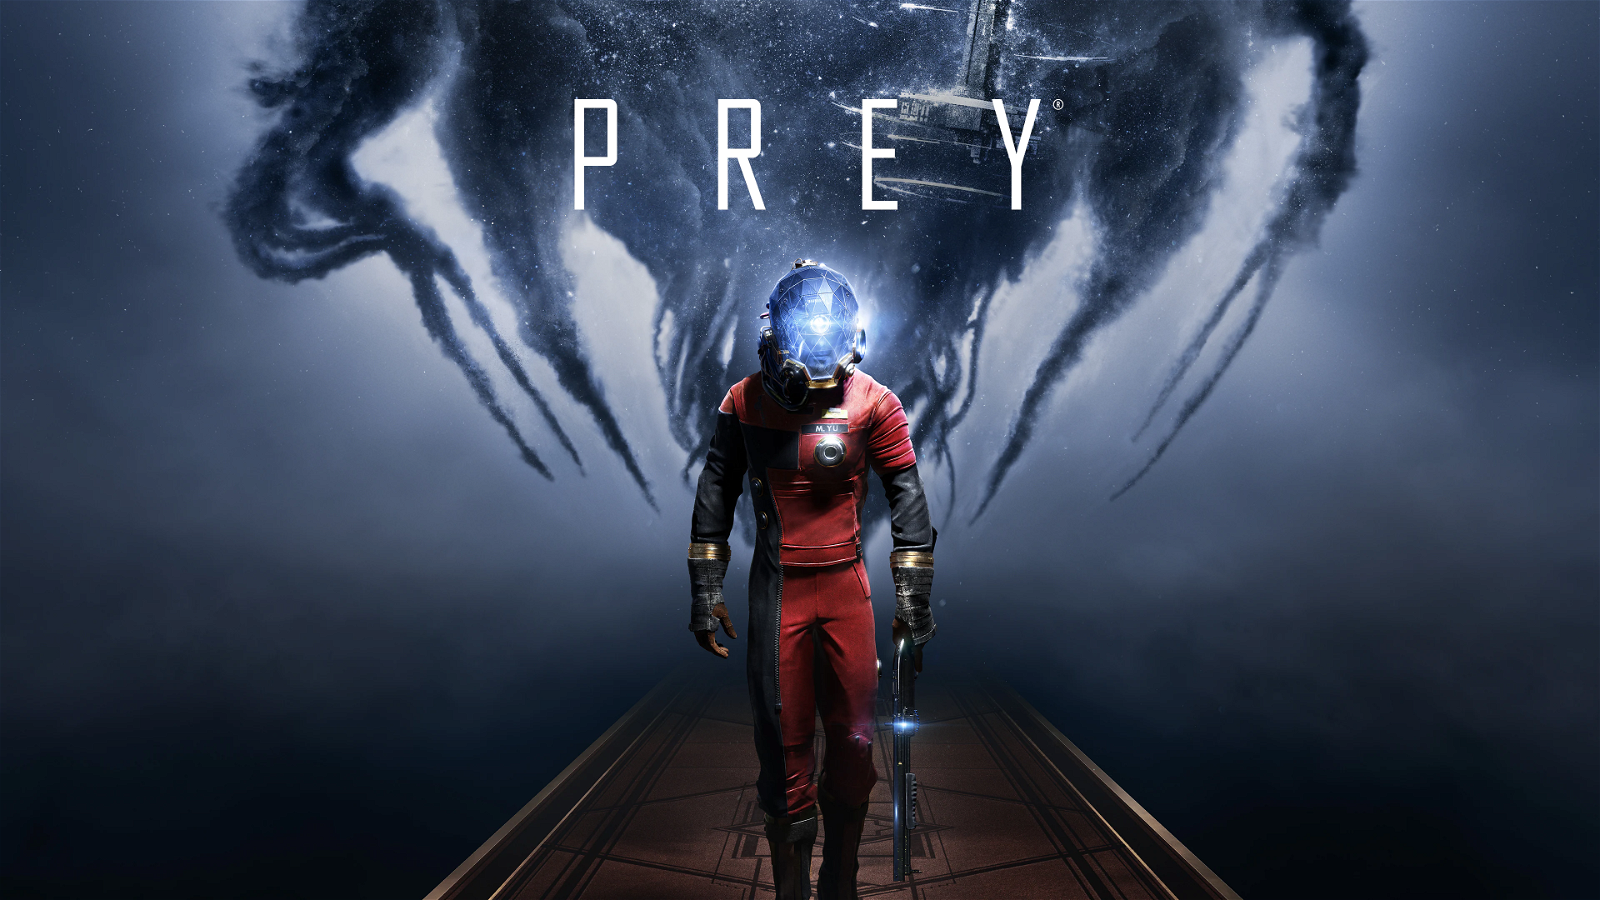 Official artwork for the game Prey